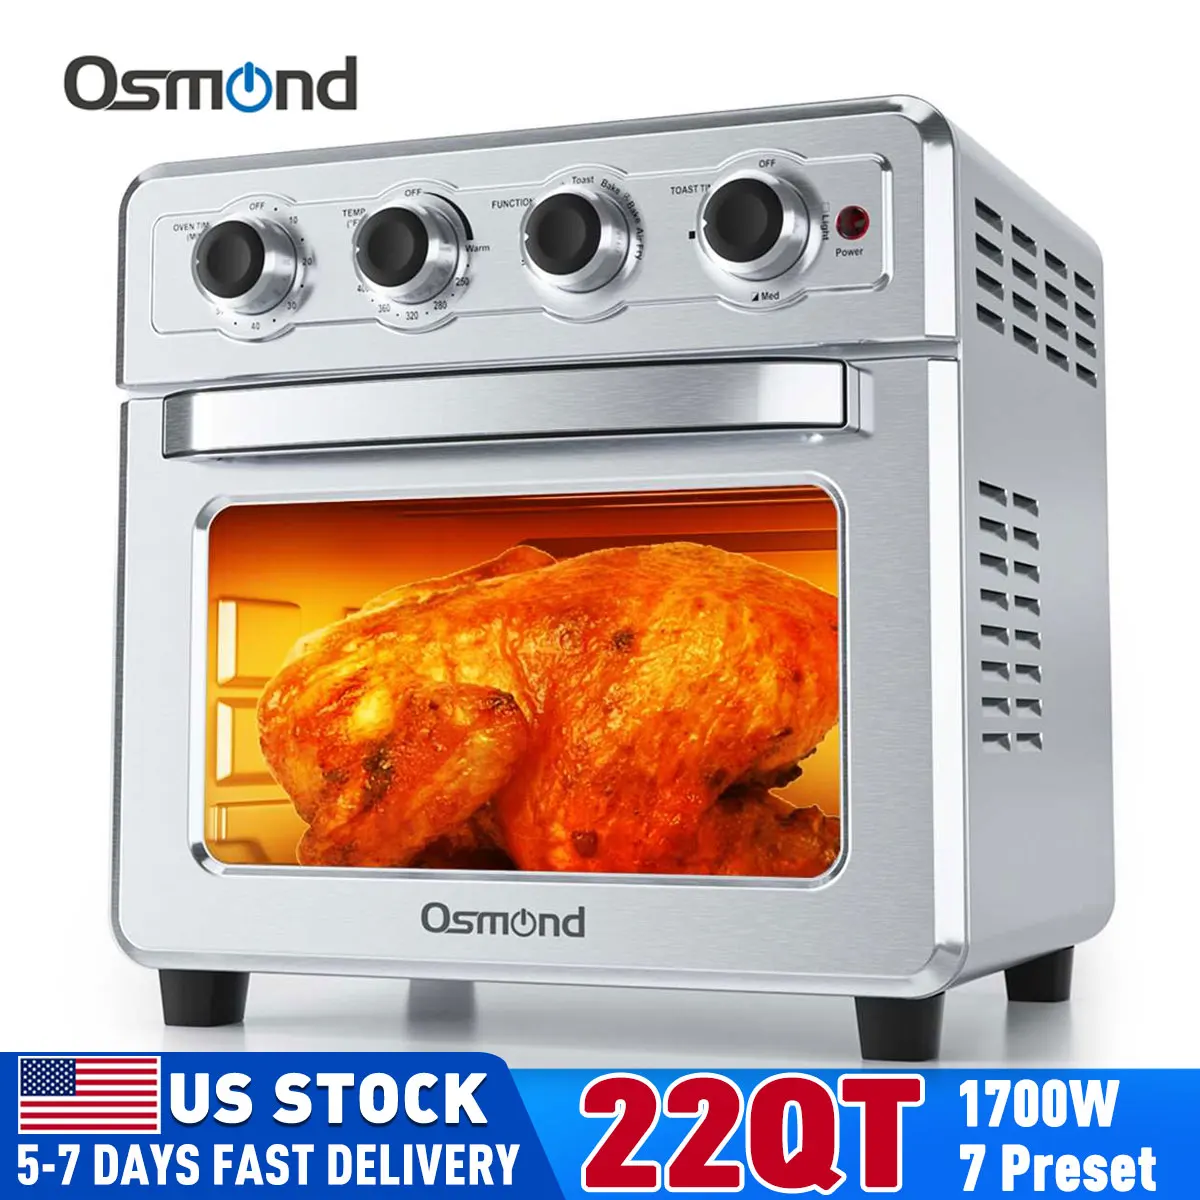 

OSMOND 22QT 1700W Electric Air Fryer Oven Rotisserie Dehydrator Convection Toaster Timer 7 in 1 Presets menu Countertop Oven